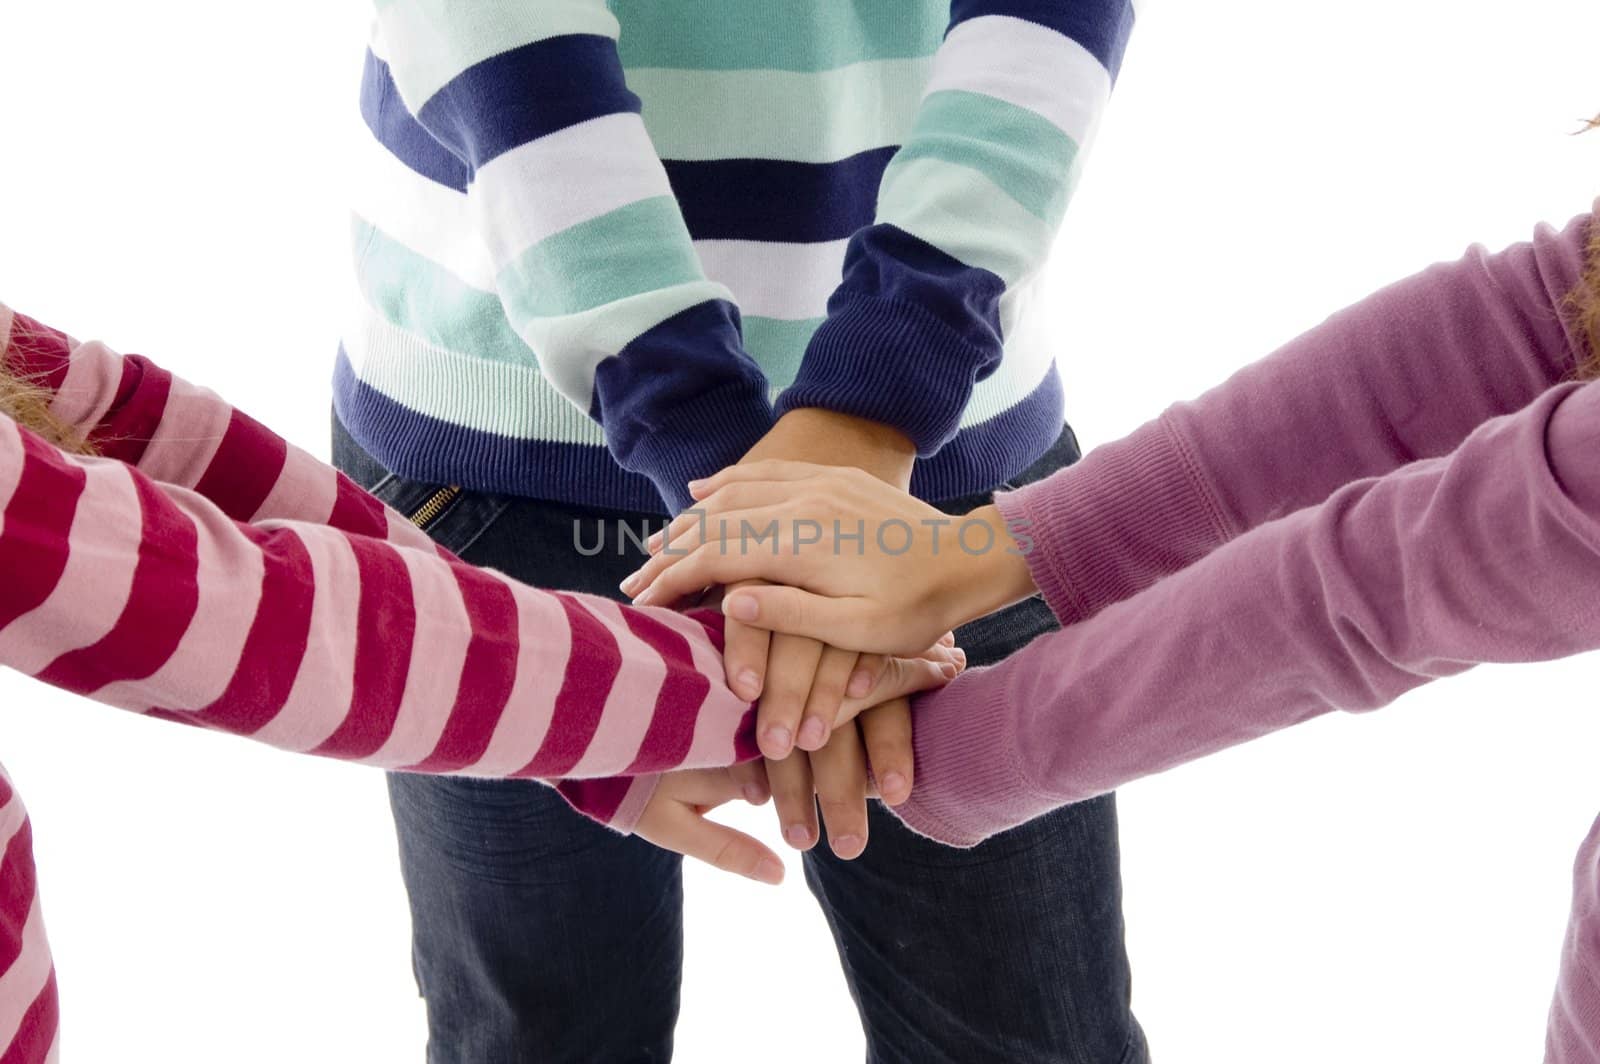 best friends with joined hands against white background